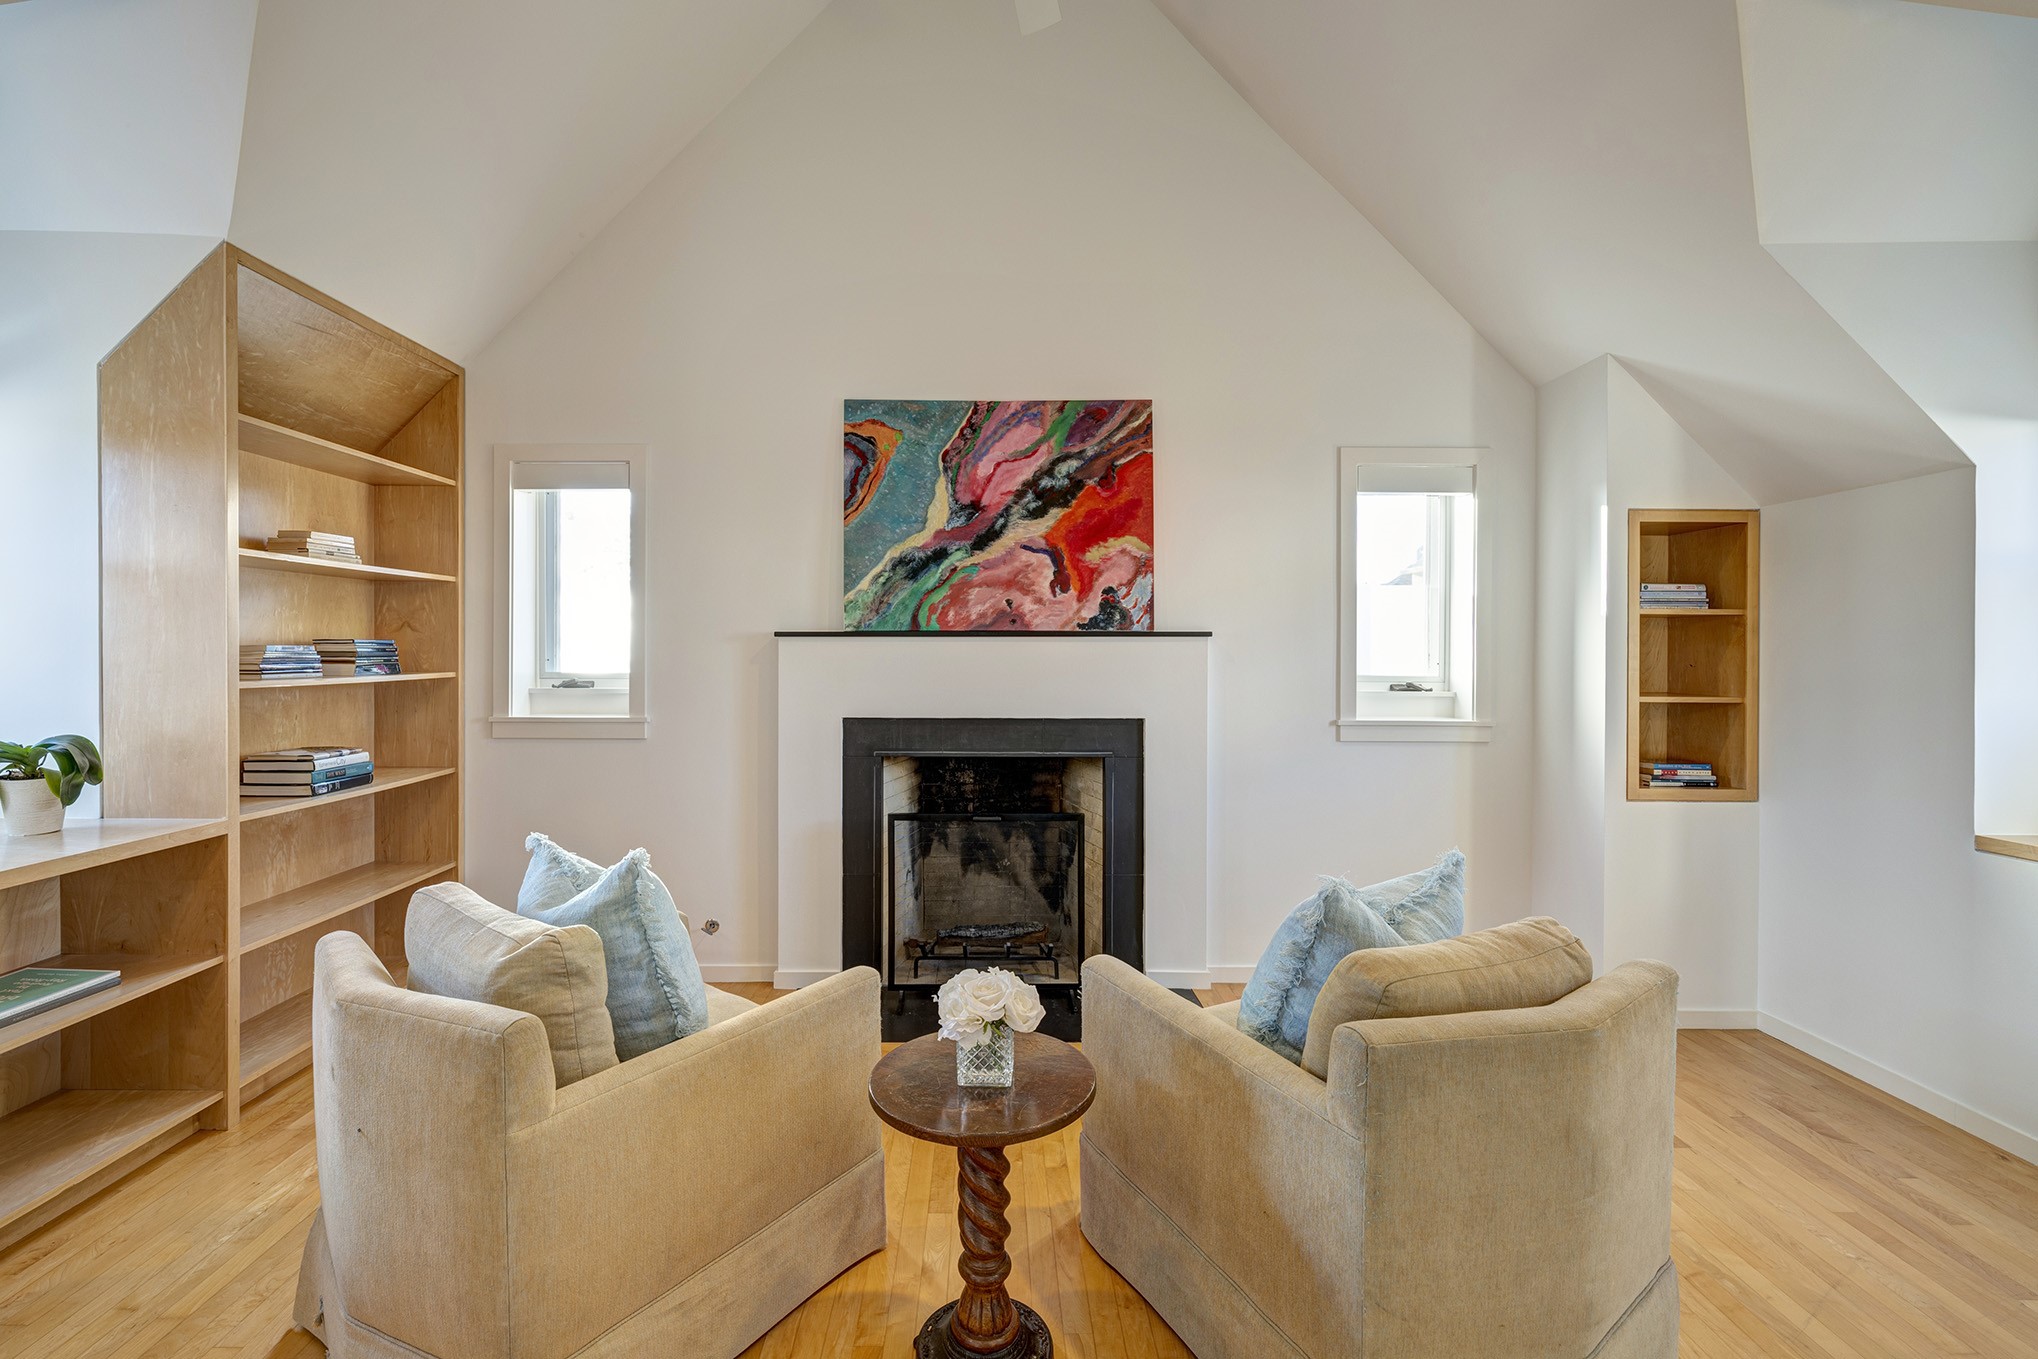 Sitting room of the primary bedroom with fireplace, built-ins and vaulted ceiling.